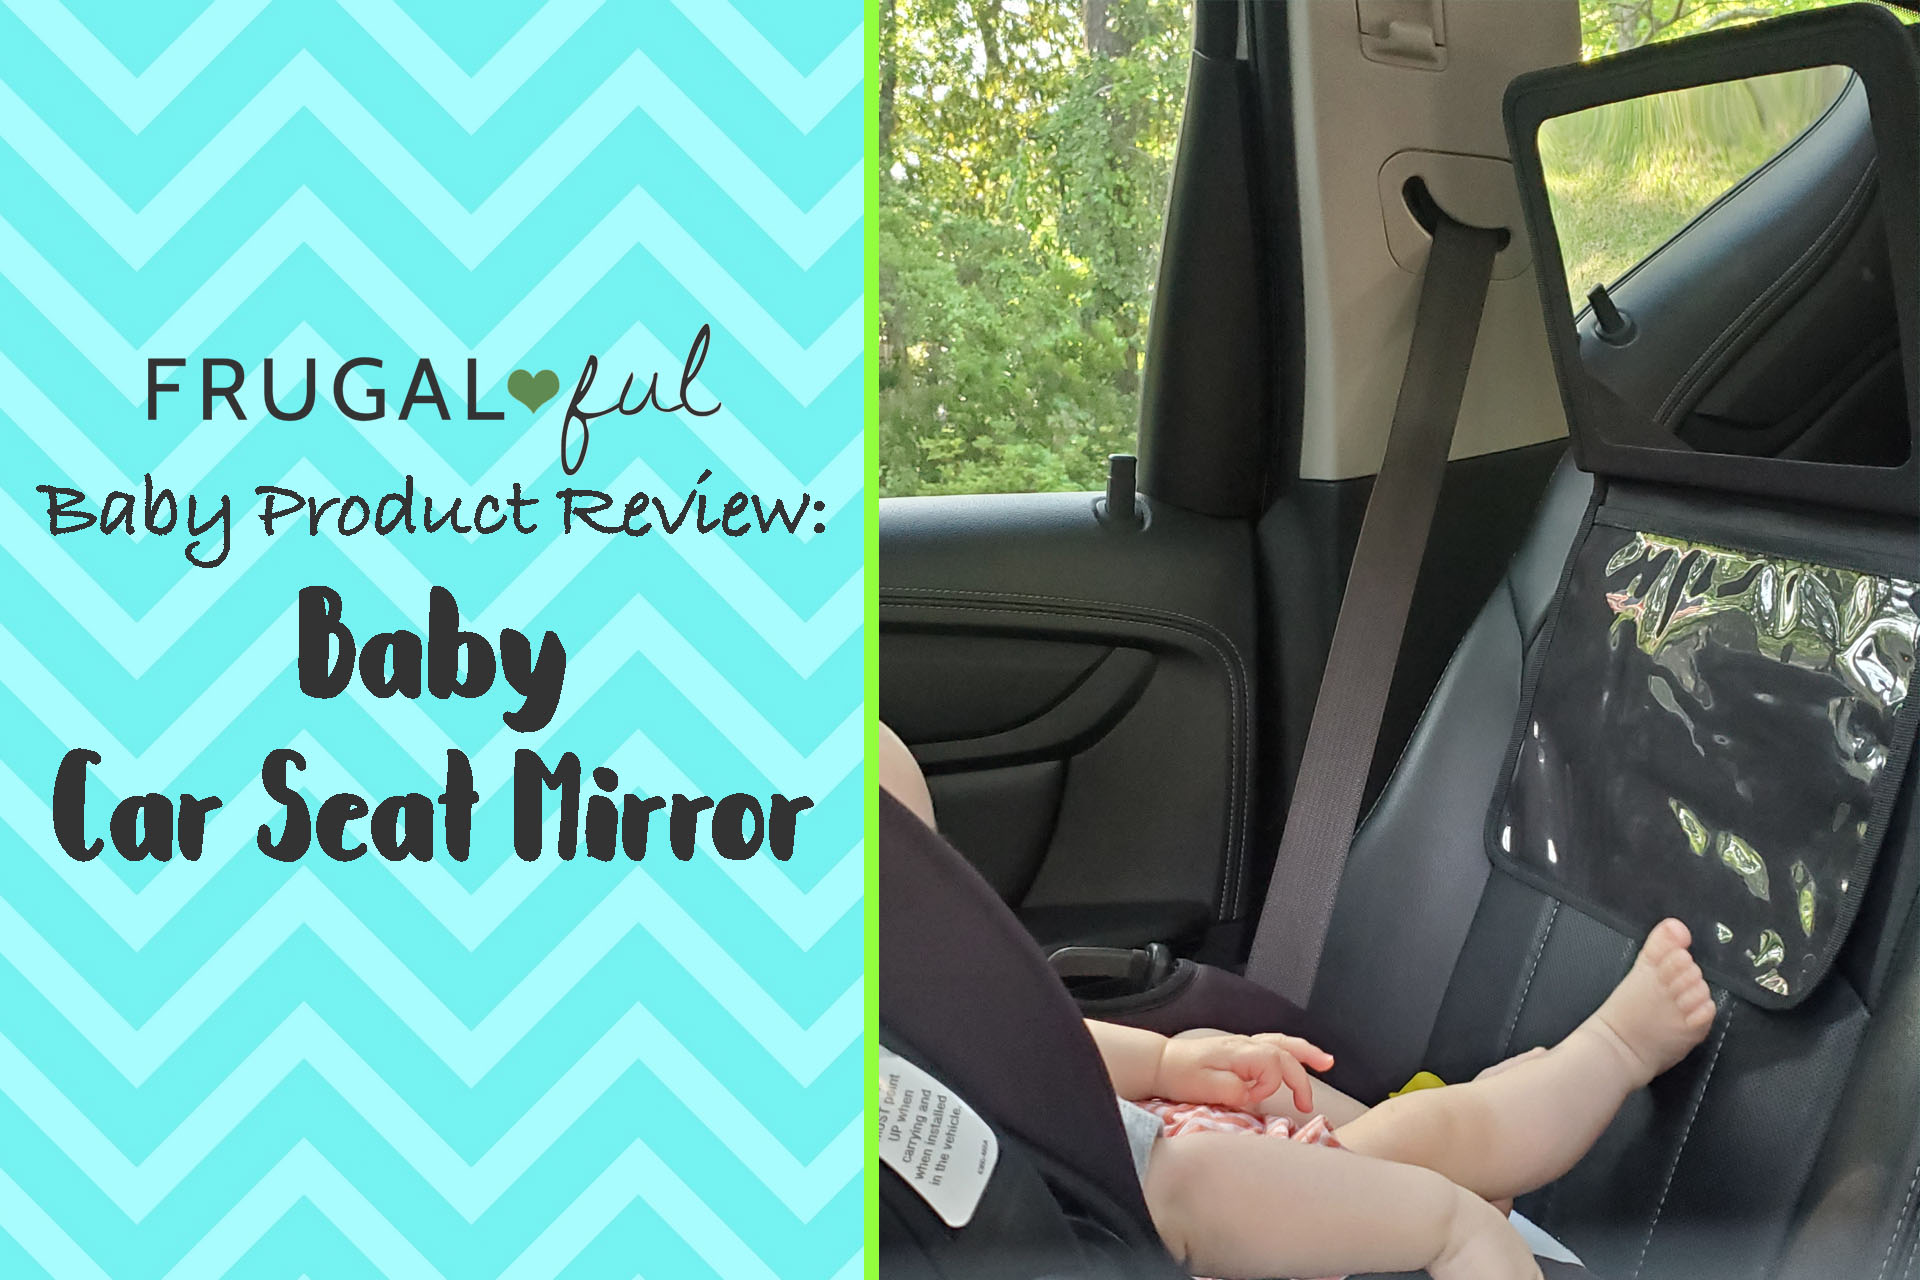 Product Review: Baby Car Mirror with Tablet Holder